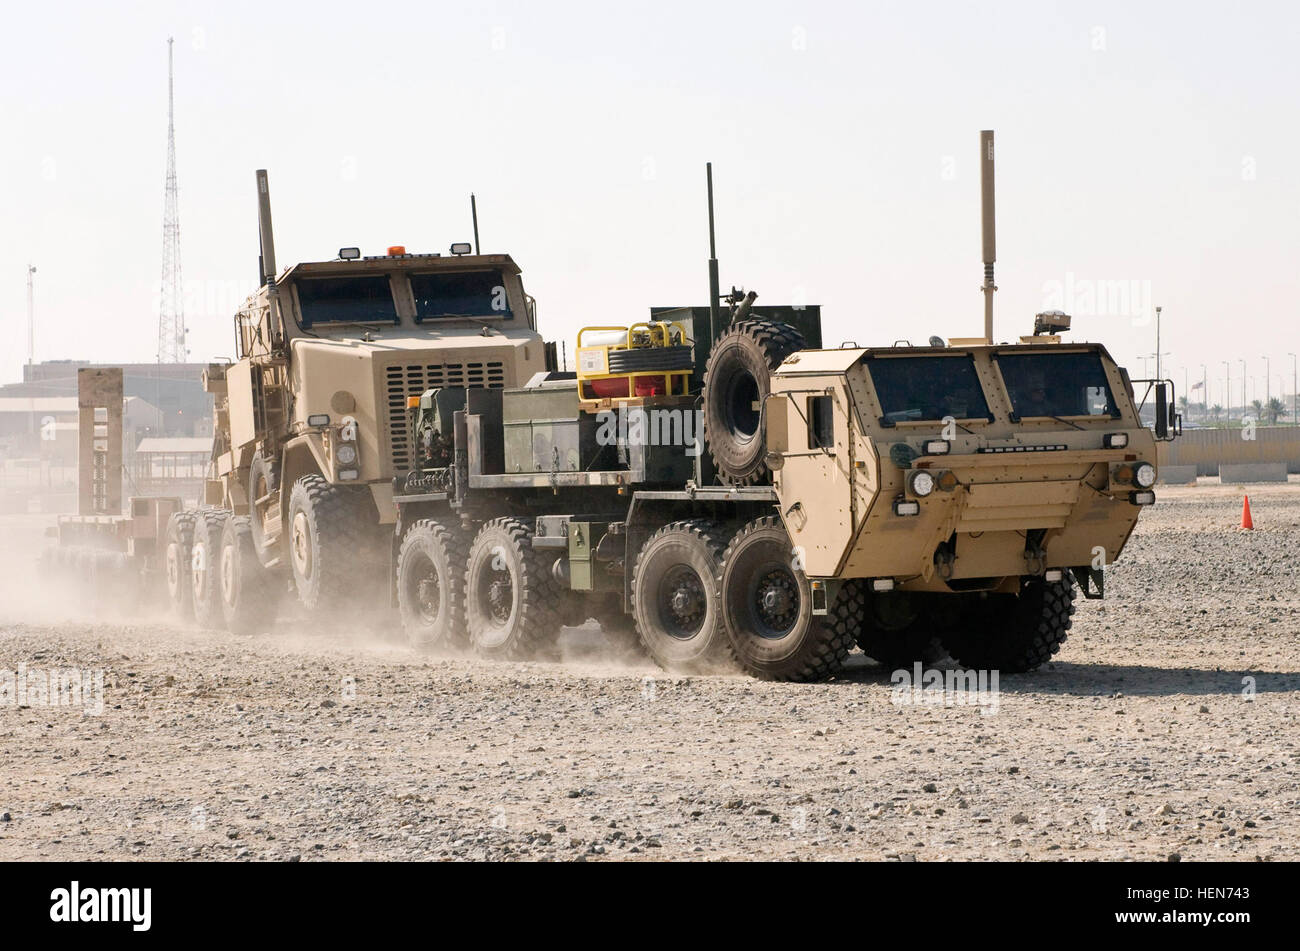 A Heavy Expanded Mobility Tactical Truck Wrecker tows a Heavy Equipment Transporter and trailer during a training exercise at Camp Arifjan, Kuwait. The trucks and the Soldiers who drive them make frequent trips into Iraq, retrieving equipment such as humvees, tanks and Mine Resistant Ambush Protected vehicles. (Photo by Monte Swift) Third Army's mission 258174 Stock Photo